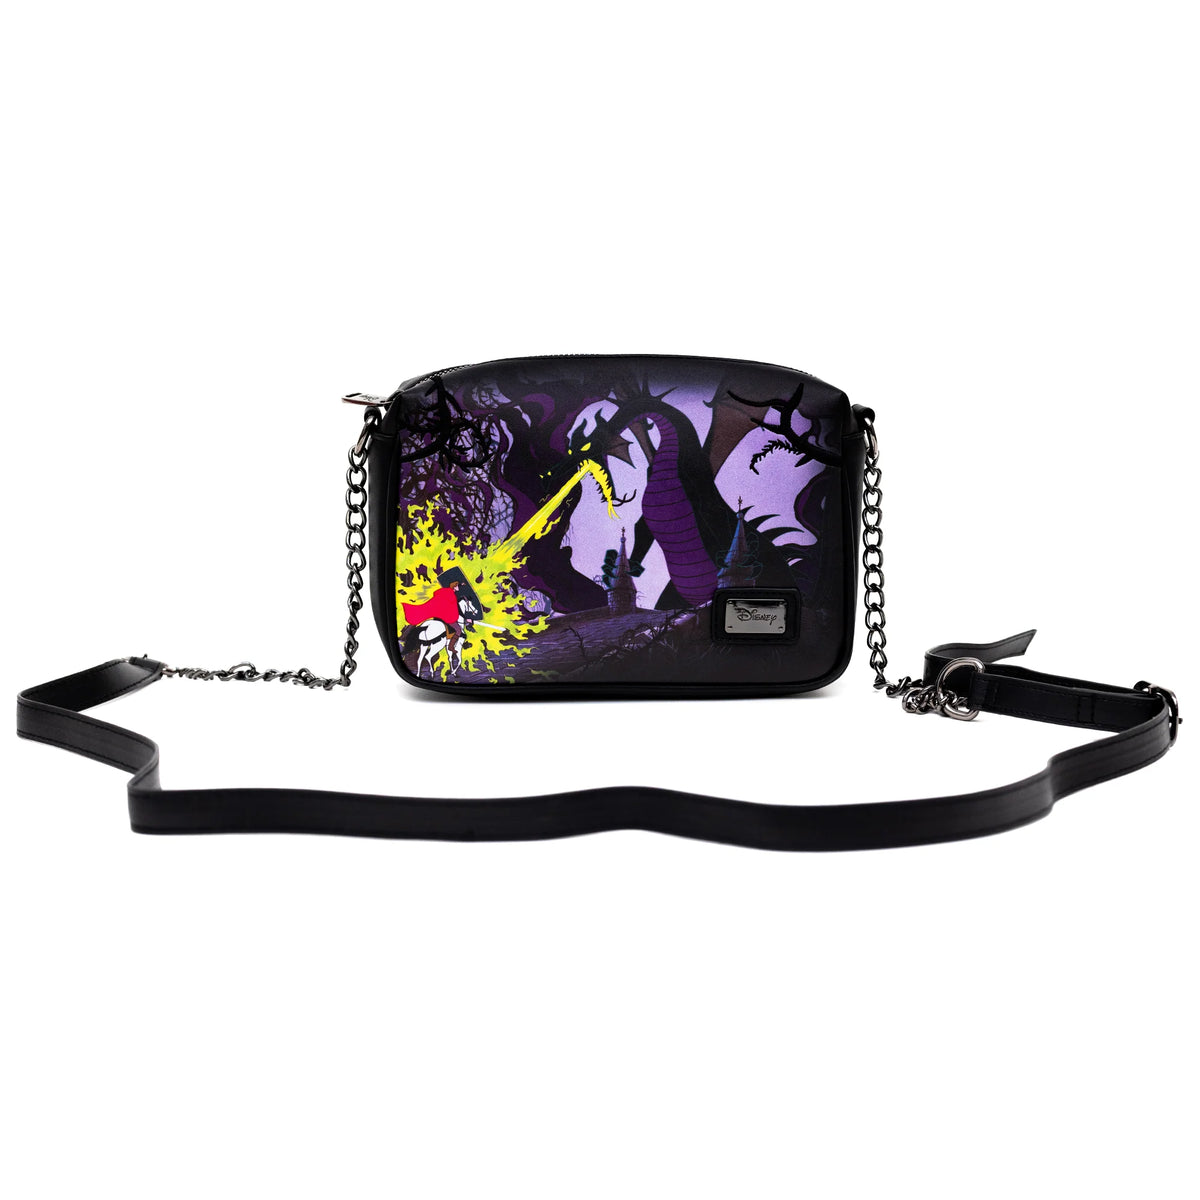 Disney Sleeping Beauty's Prince Phillip And Maleficent Dragon Scene With Princess Aurora And Castle Pose Crossbody